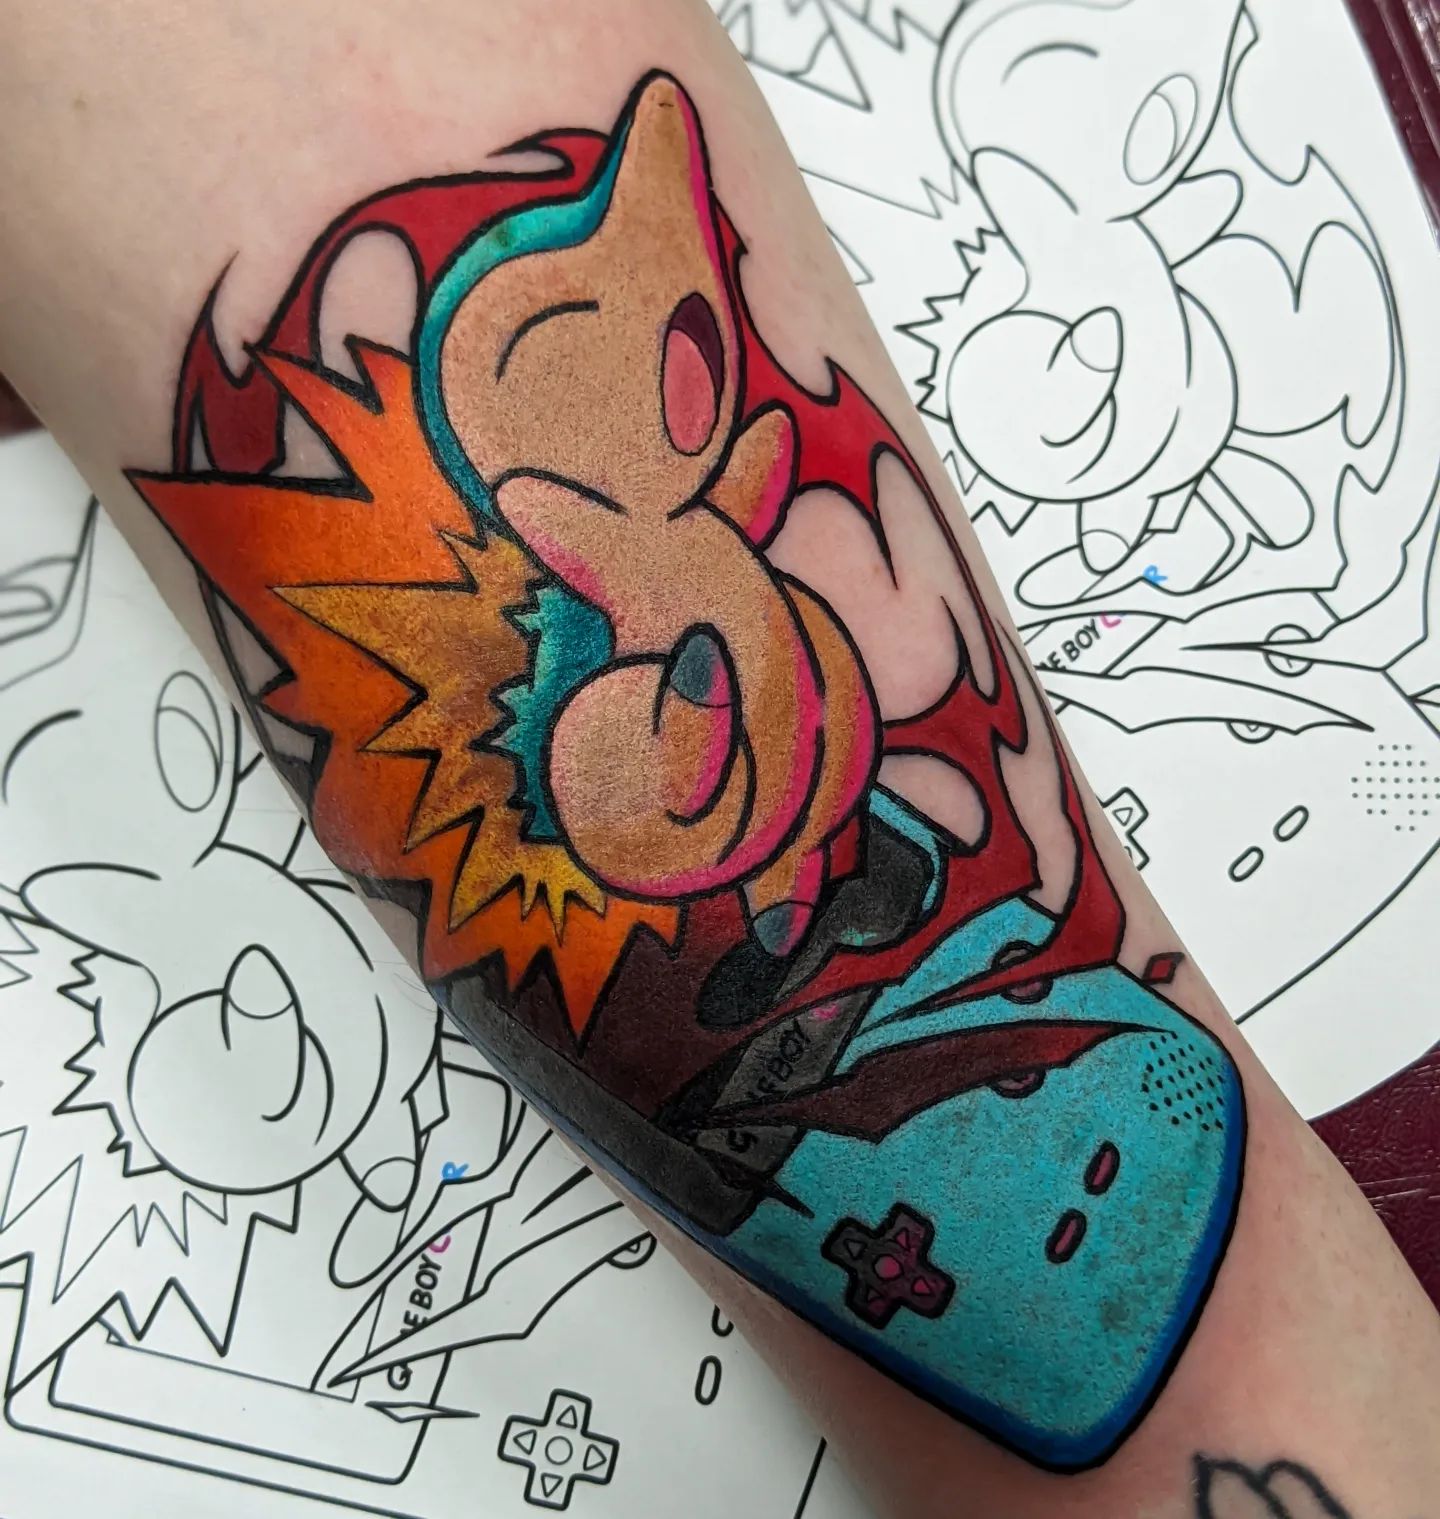 30+ Pokemon Tattoo Design Ideas for Men and Women Trainers - 100 Tattoos